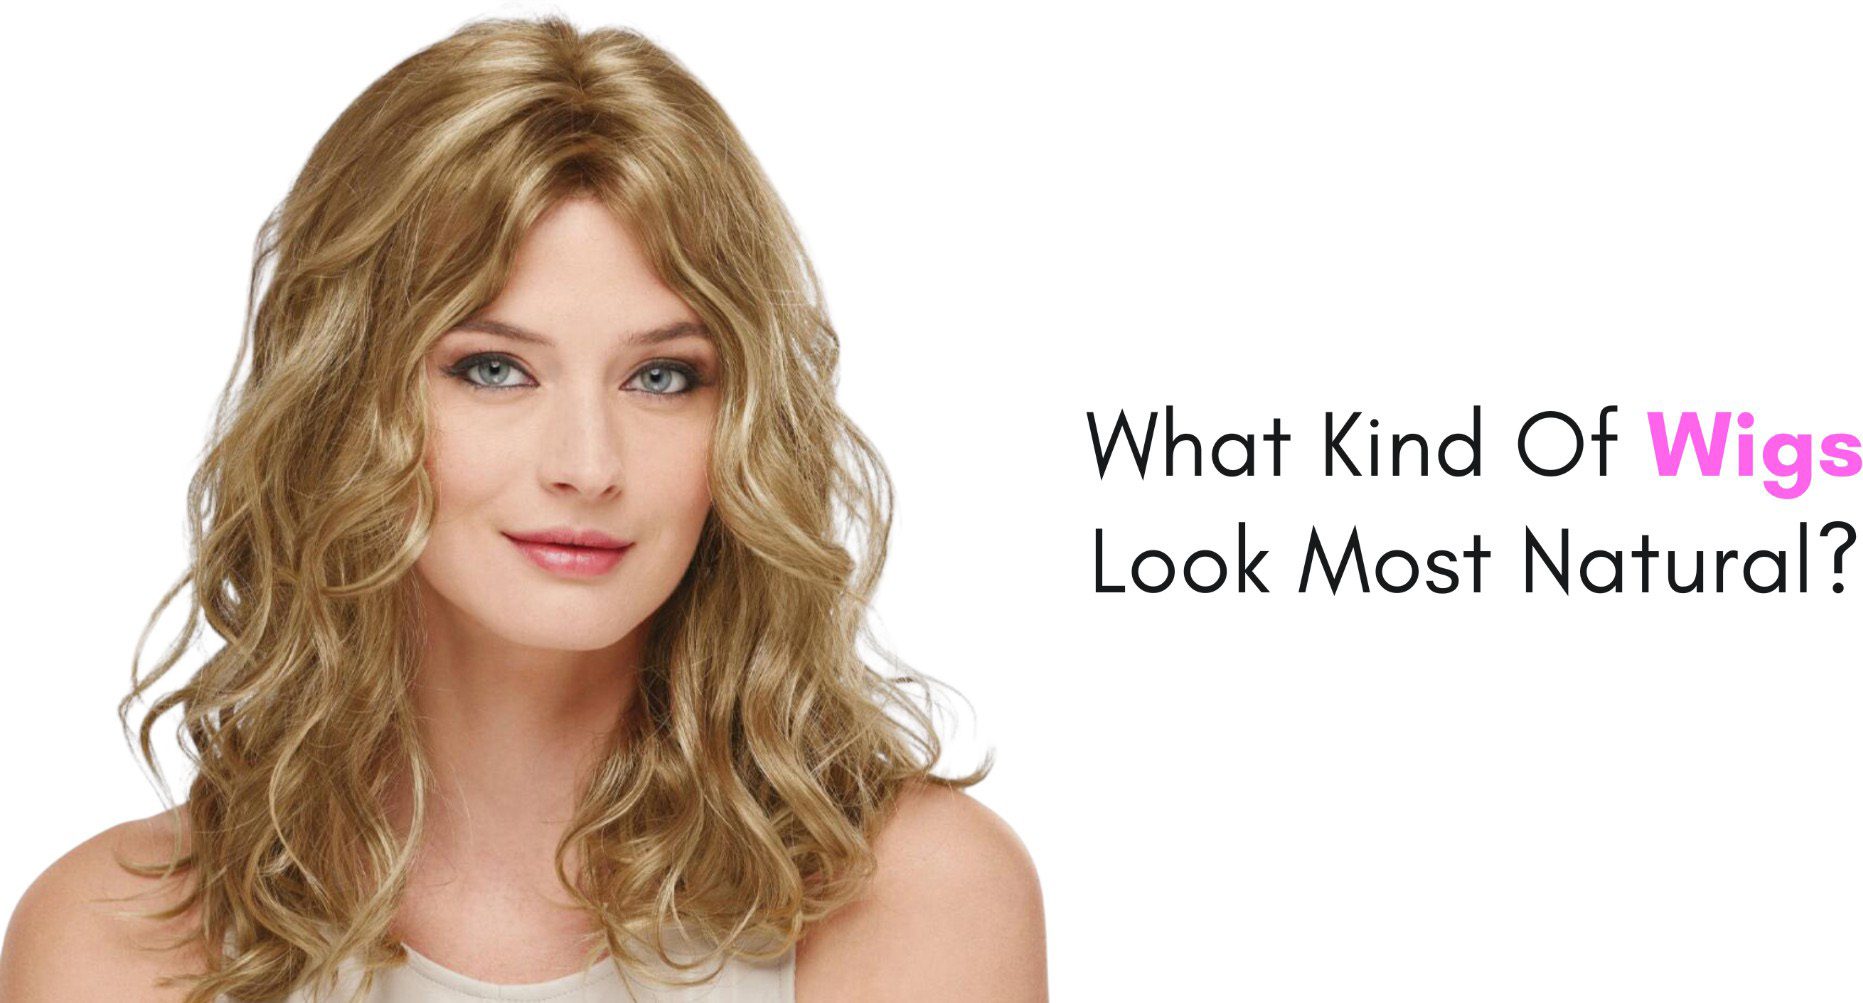 What Kind Of Wigs Look Most Natural?